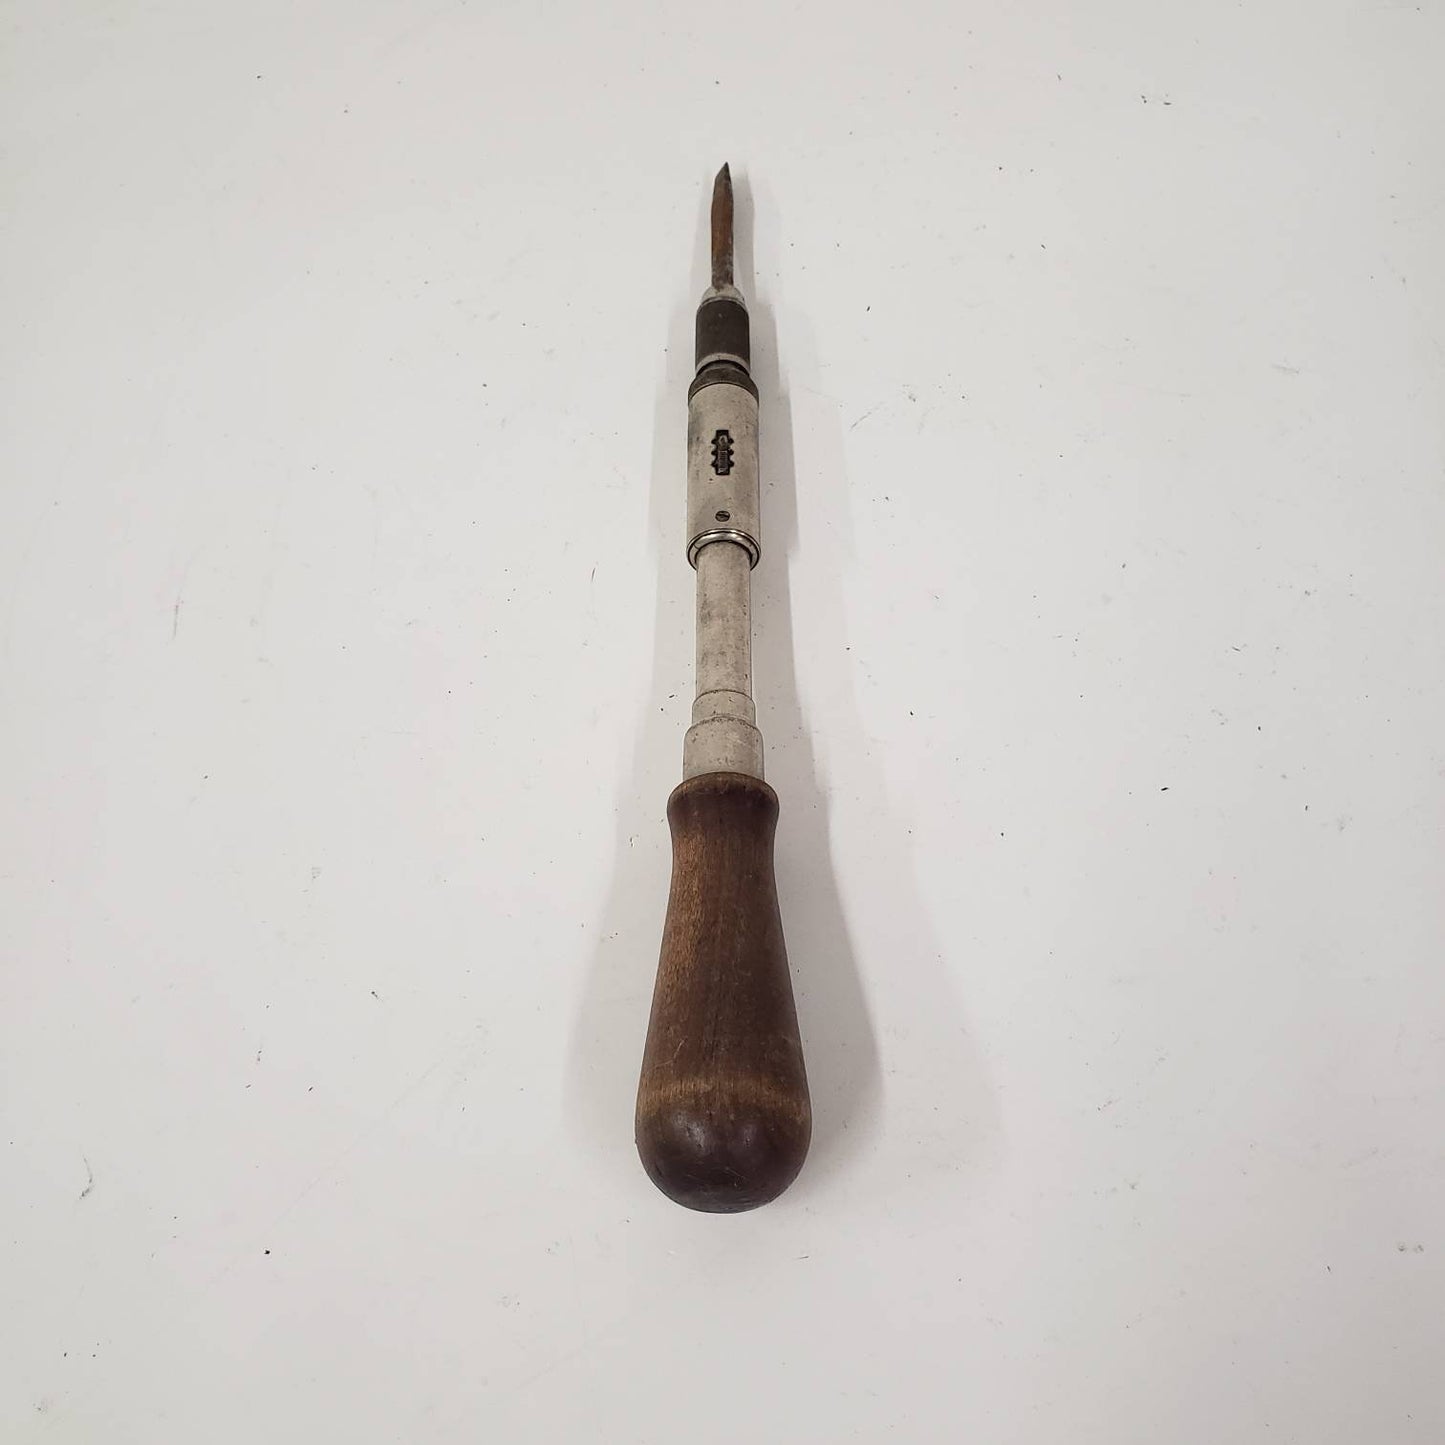 ratcheting screwdriver north bros yankee antique hand tools woodworking